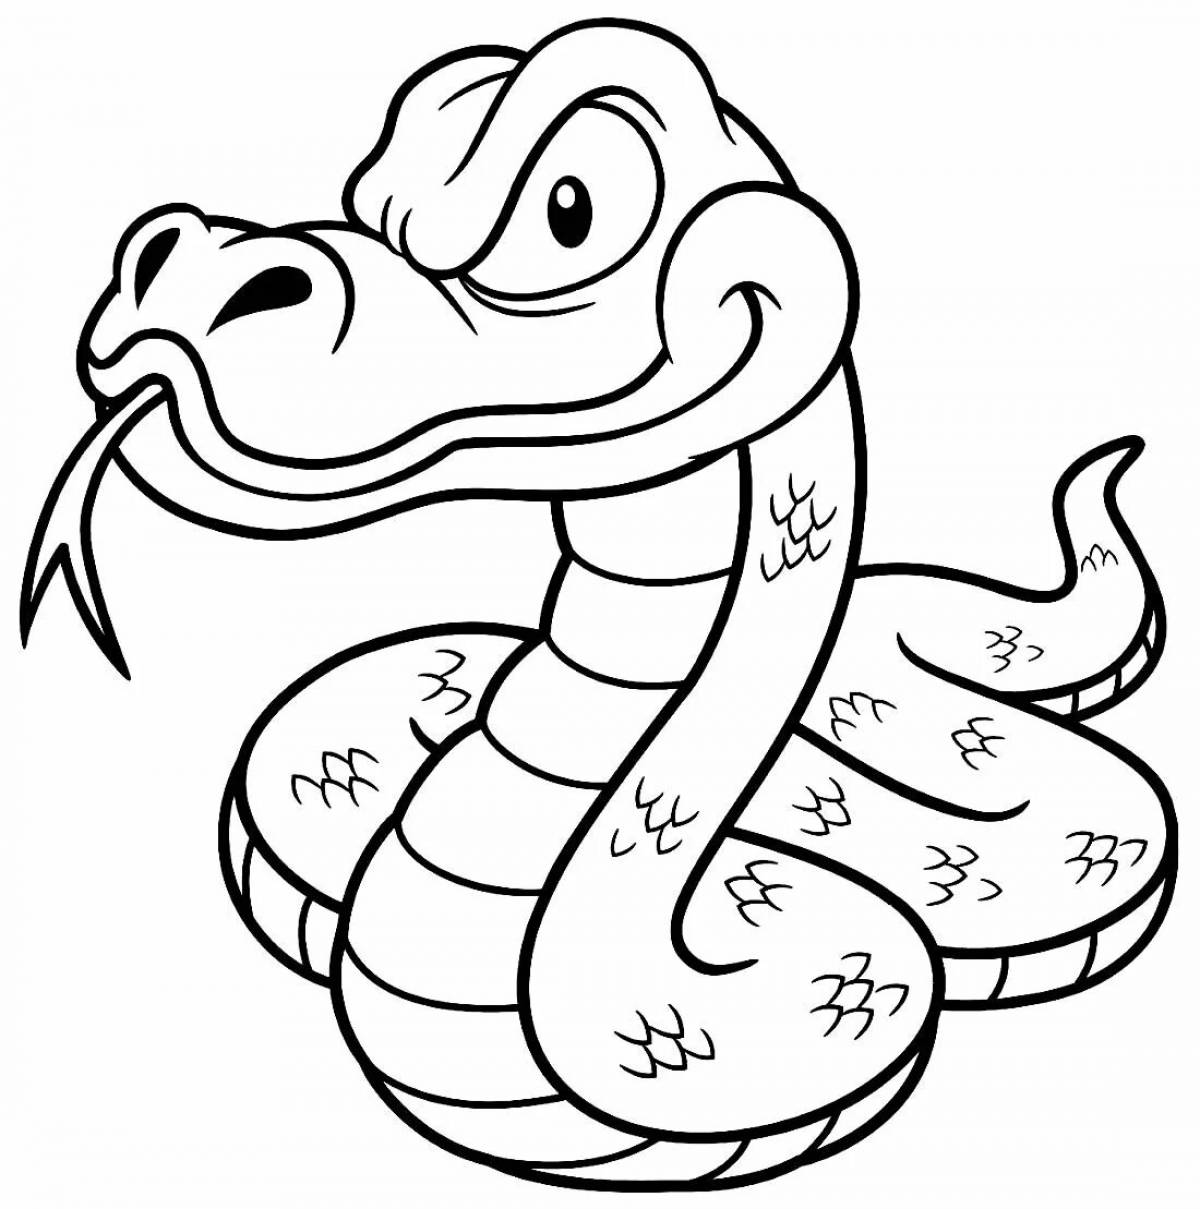 Kaa amazing coloring page